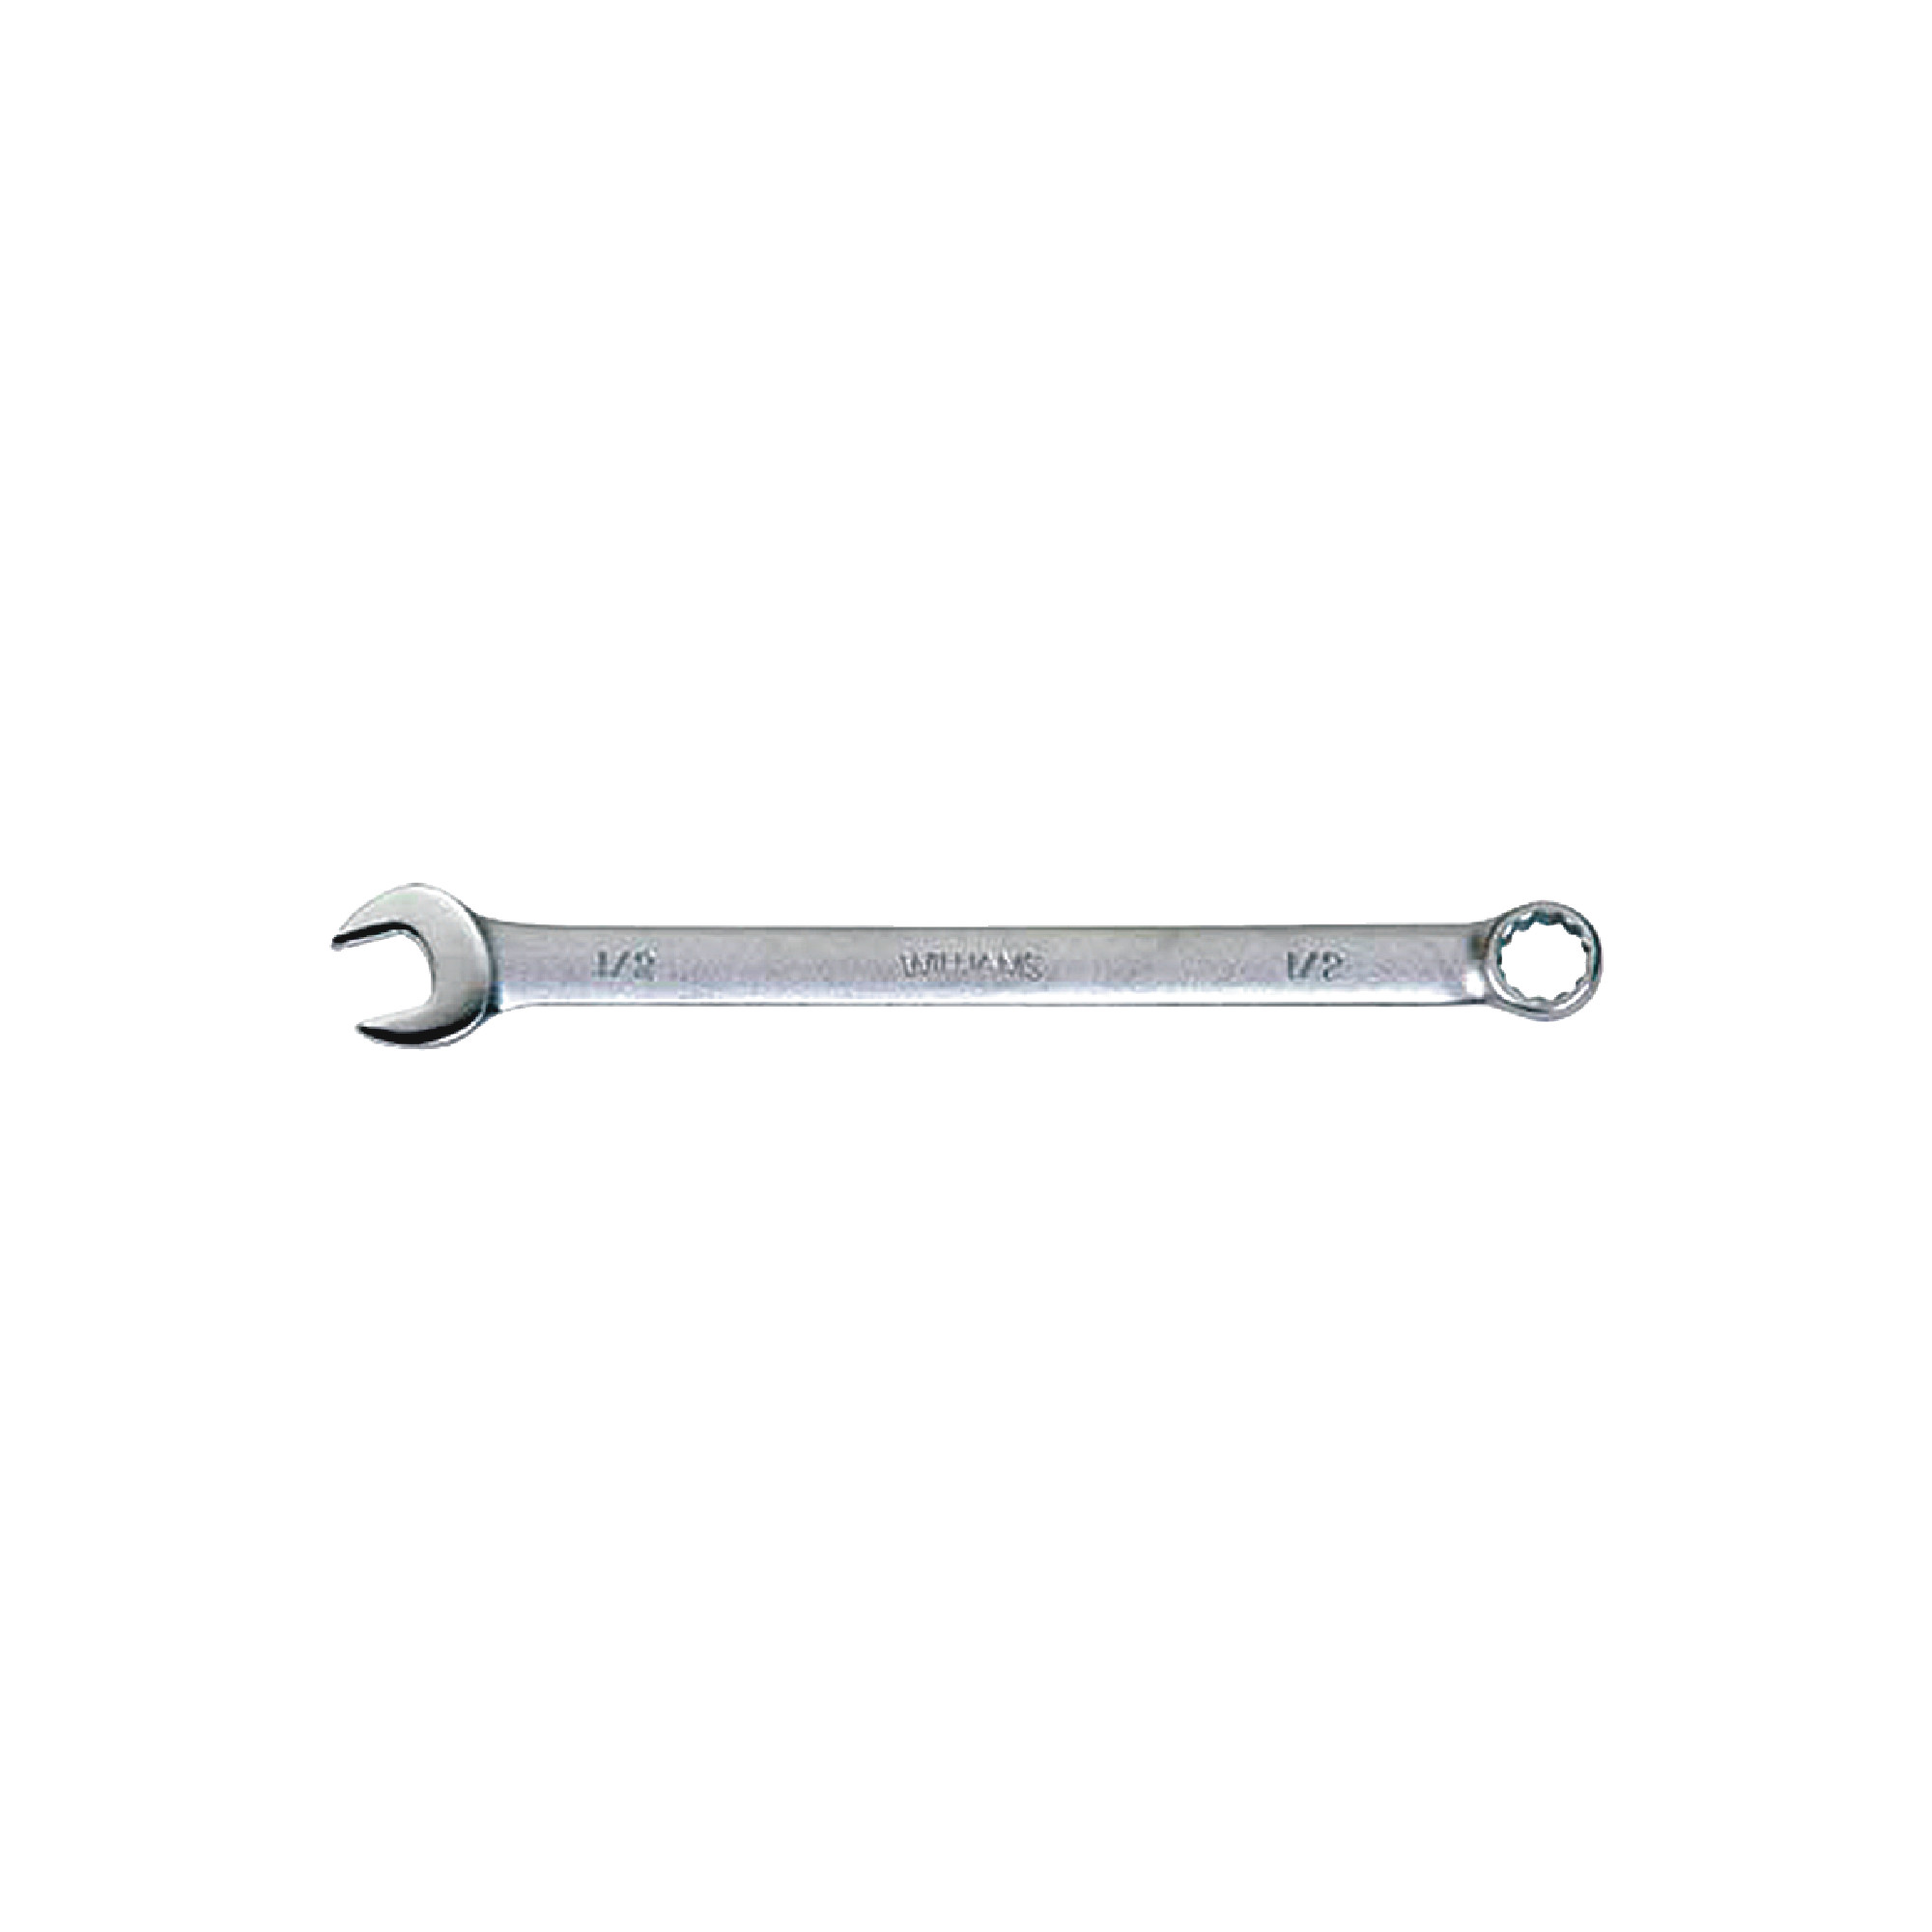 Satin Chrome Finish 13mm Combination Wrench